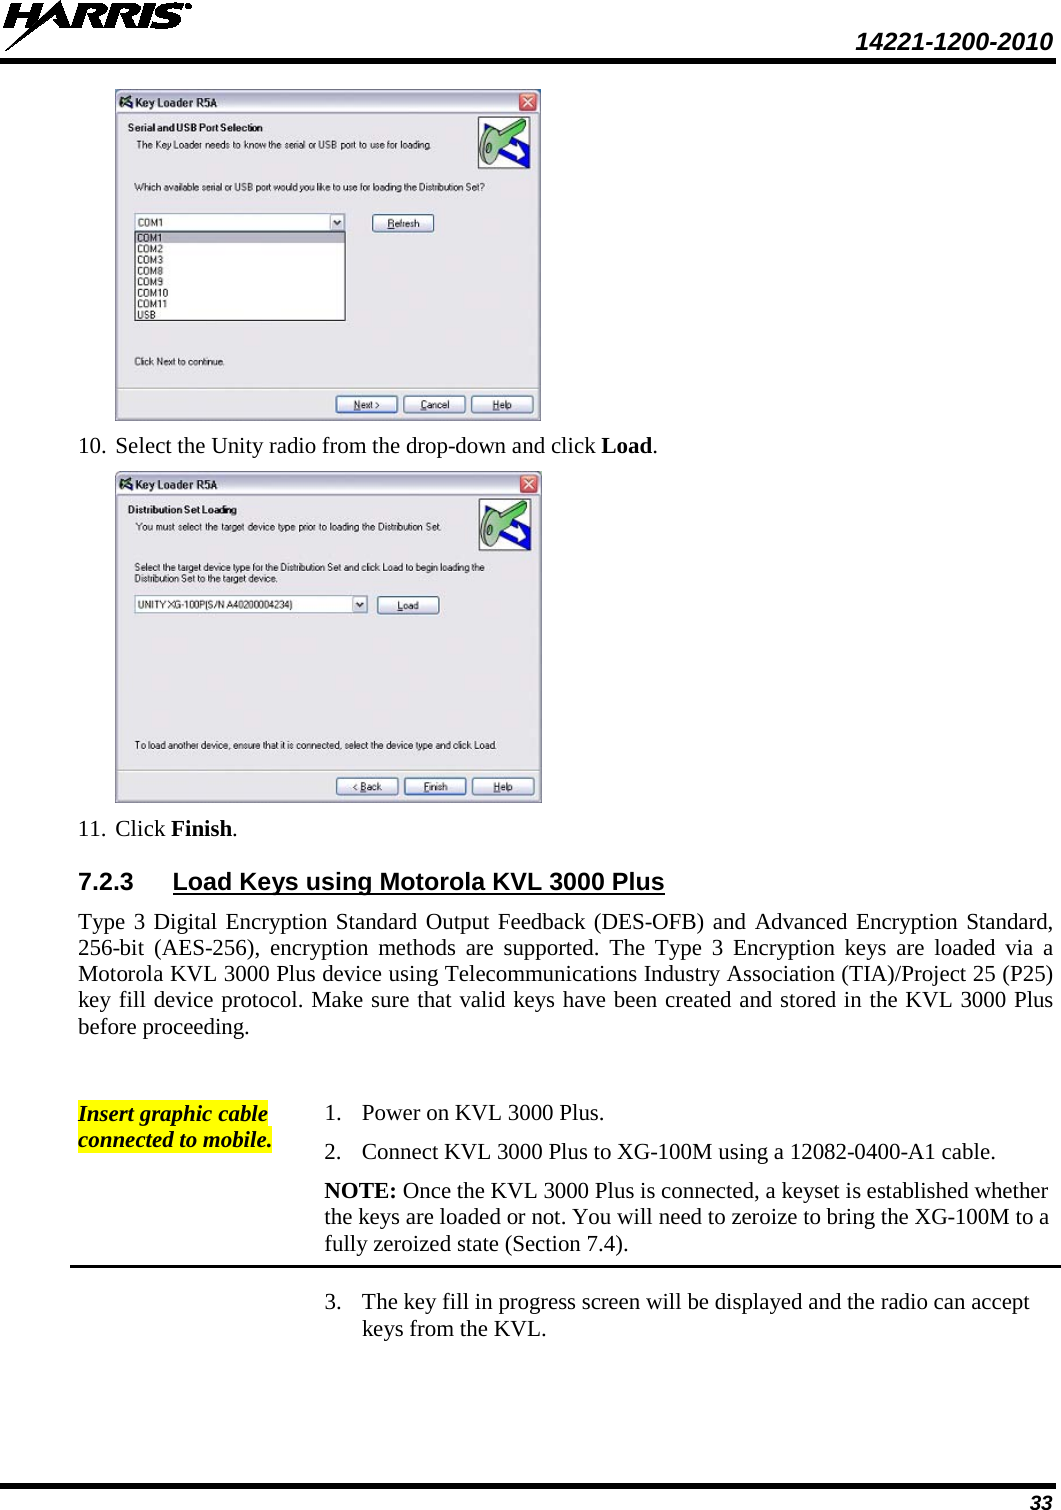  14221-1200-2010 33  10. Select the Unity radio from the drop-down and click Load.  11. Click Finish. 7.2.3 Load Keys using Motorola KVL 3000 Plus Type 3 Digital Encryption Standard Output Feedback (DES-OFB) and Advanced Encryption Standard, 256-bit (AES-256), encryption methods are supported. The Type 3 Encryption keys are loaded via a Motorola KVL 3000 Plus device using Telecommunications Industry Association (TIA)/Project 25 (P25) key fill device protocol. Make sure that valid keys have been created and stored in the KVL 3000 Plus before proceeding.  Insert graphic cable connected to mobile. 1. Power on KVL 3000 Plus. 2. Connect KVL 3000 Plus to XG-100M using a 12082-0400-A1 cable. NOTE: Once the KVL 3000 Plus is connected, a keyset is established whether the keys are loaded or not. You will need to zeroize to bring the XG-100M to a fully zeroized state (Section 7.4).  3. The key fill in progress screen will be displayed and the radio can accept keys from the KVL. 